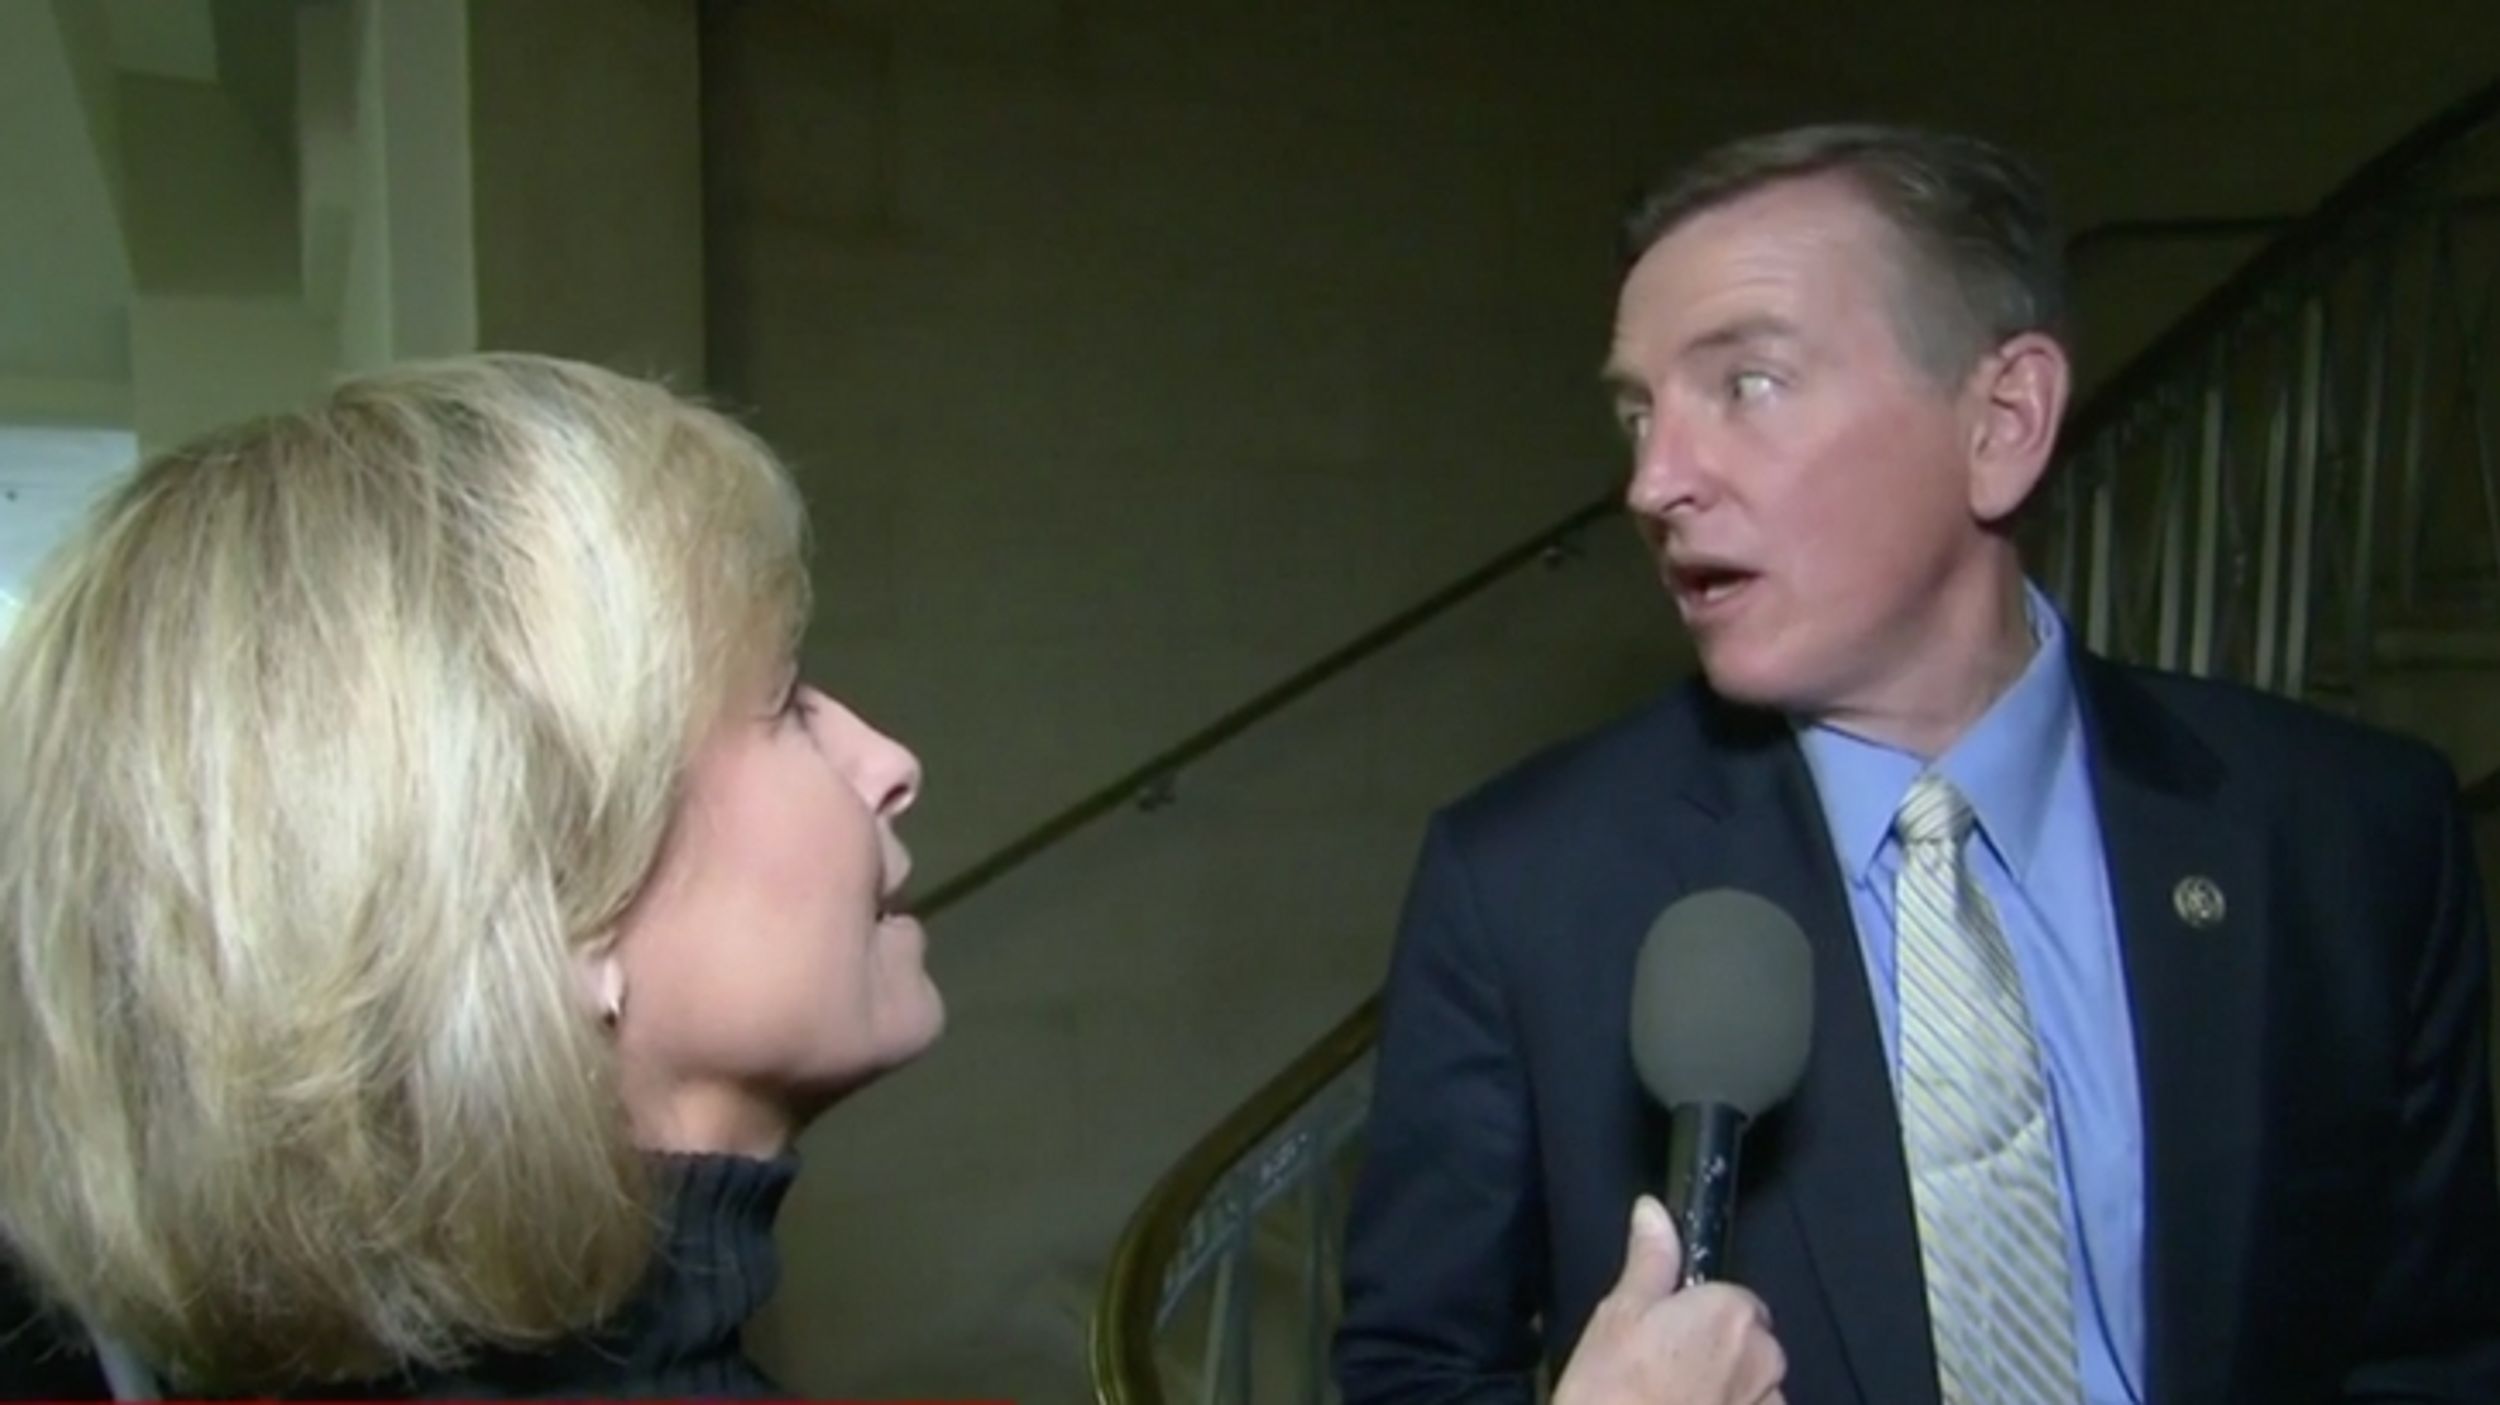 WATCH: Paul Gosar Evades CNN Over Charlottesville Conspiracy Claims